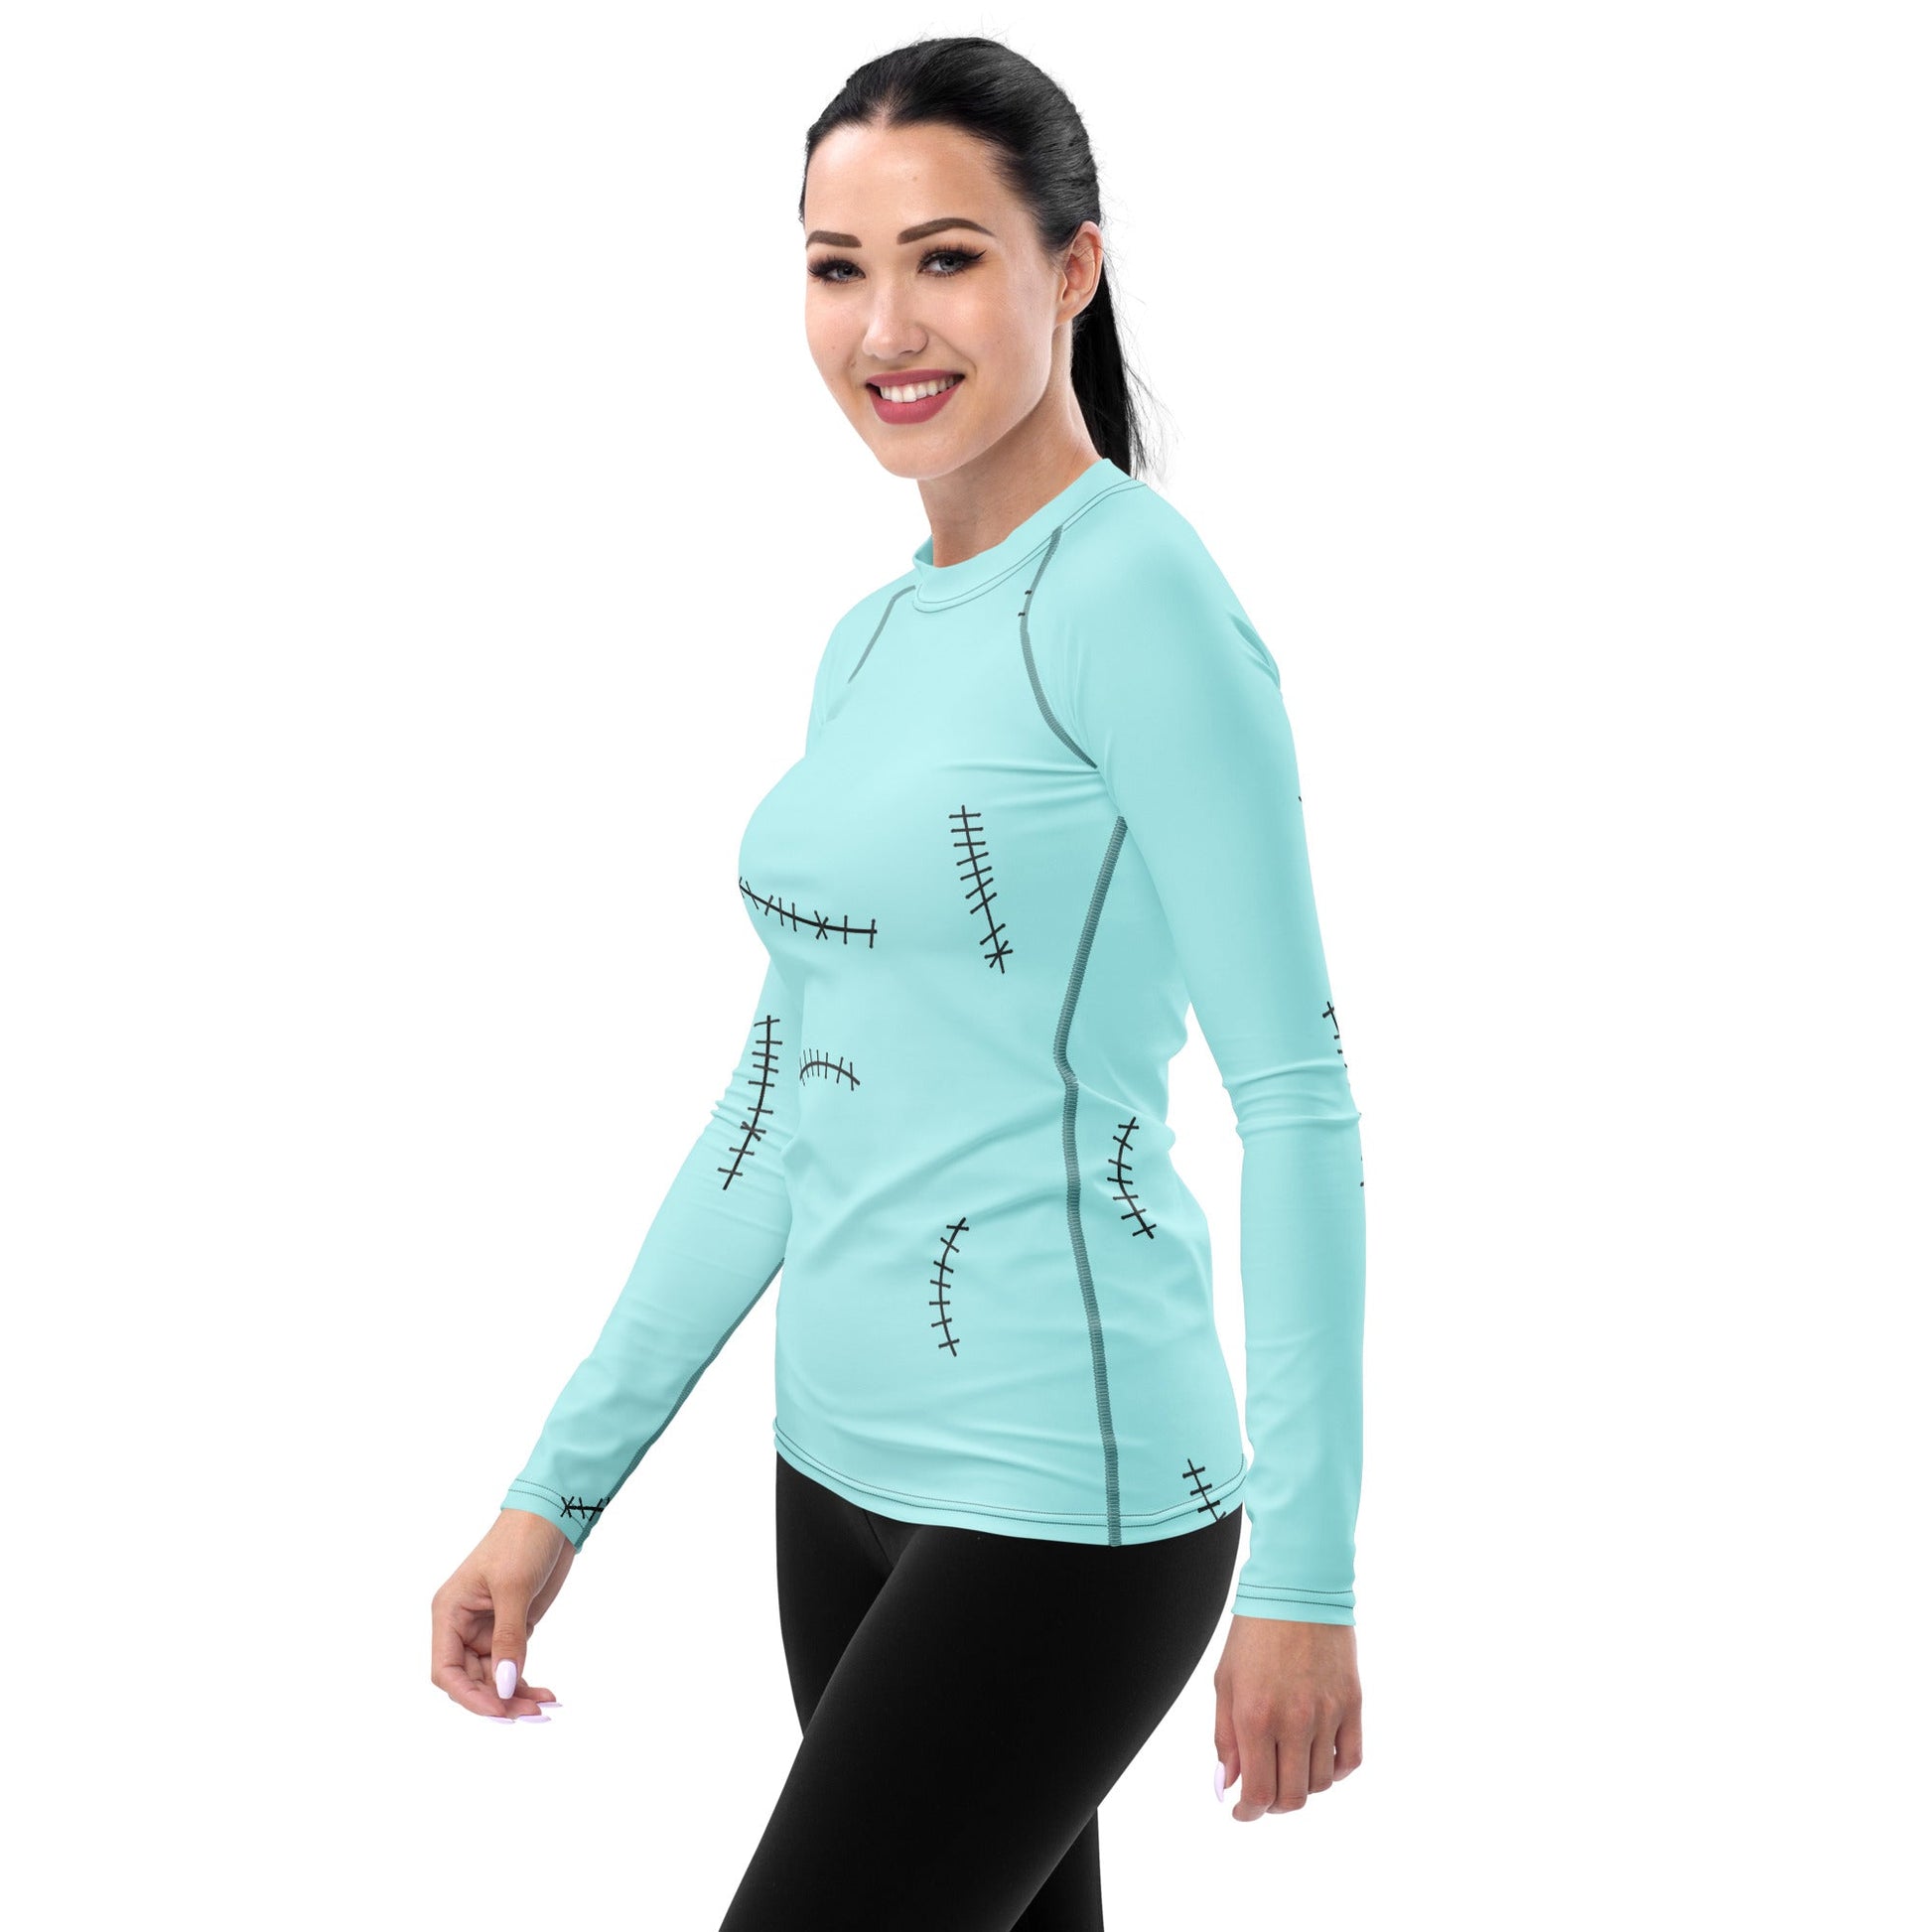 Sally Skin Women's Rash Guard active wearboo to youchristmas#tag4##tag5##tag6#